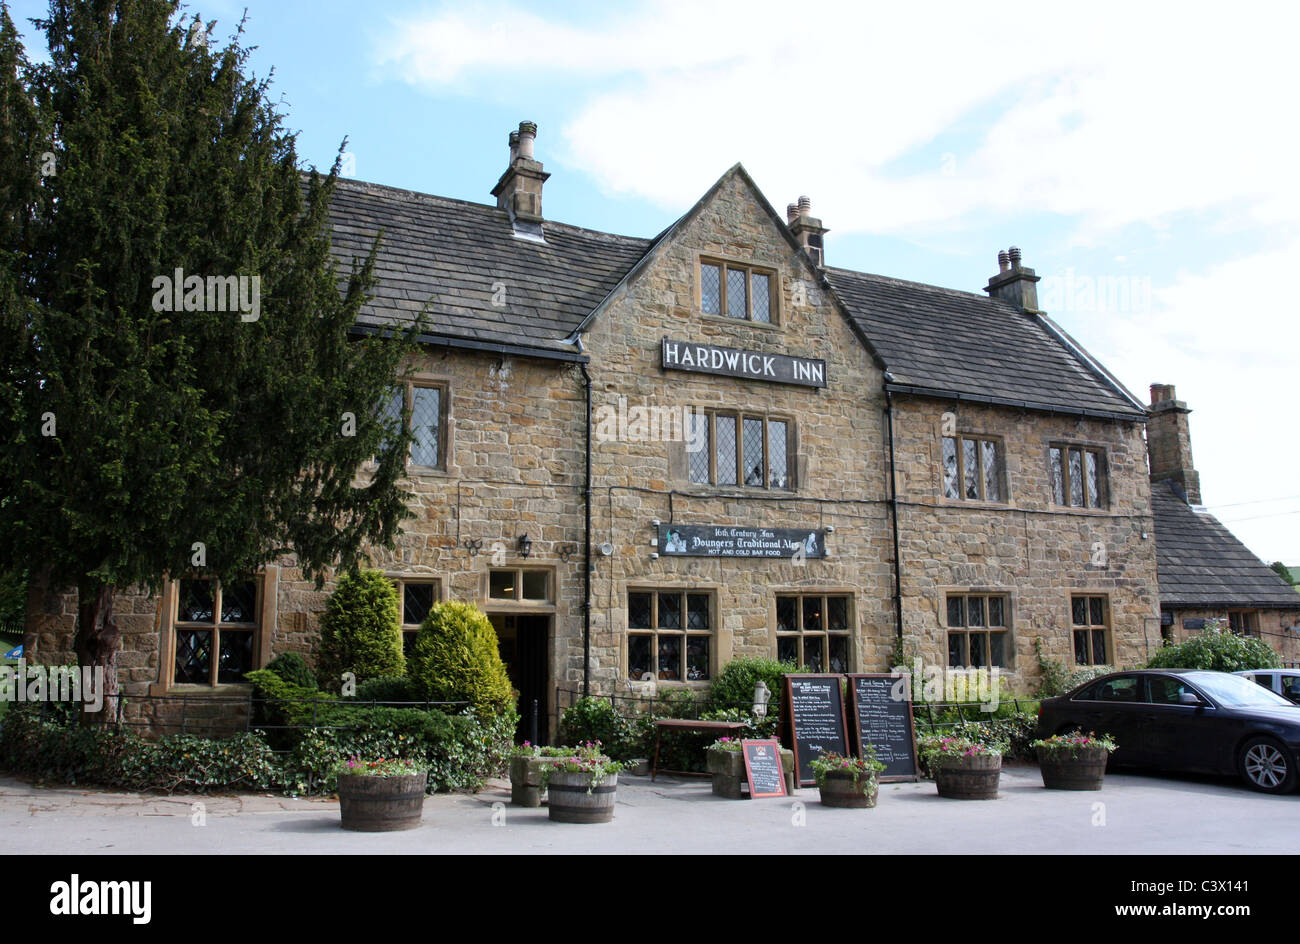 The Harwick Inn in Derbyshire situated on the south gate of Hardwick Hall Stock Photo